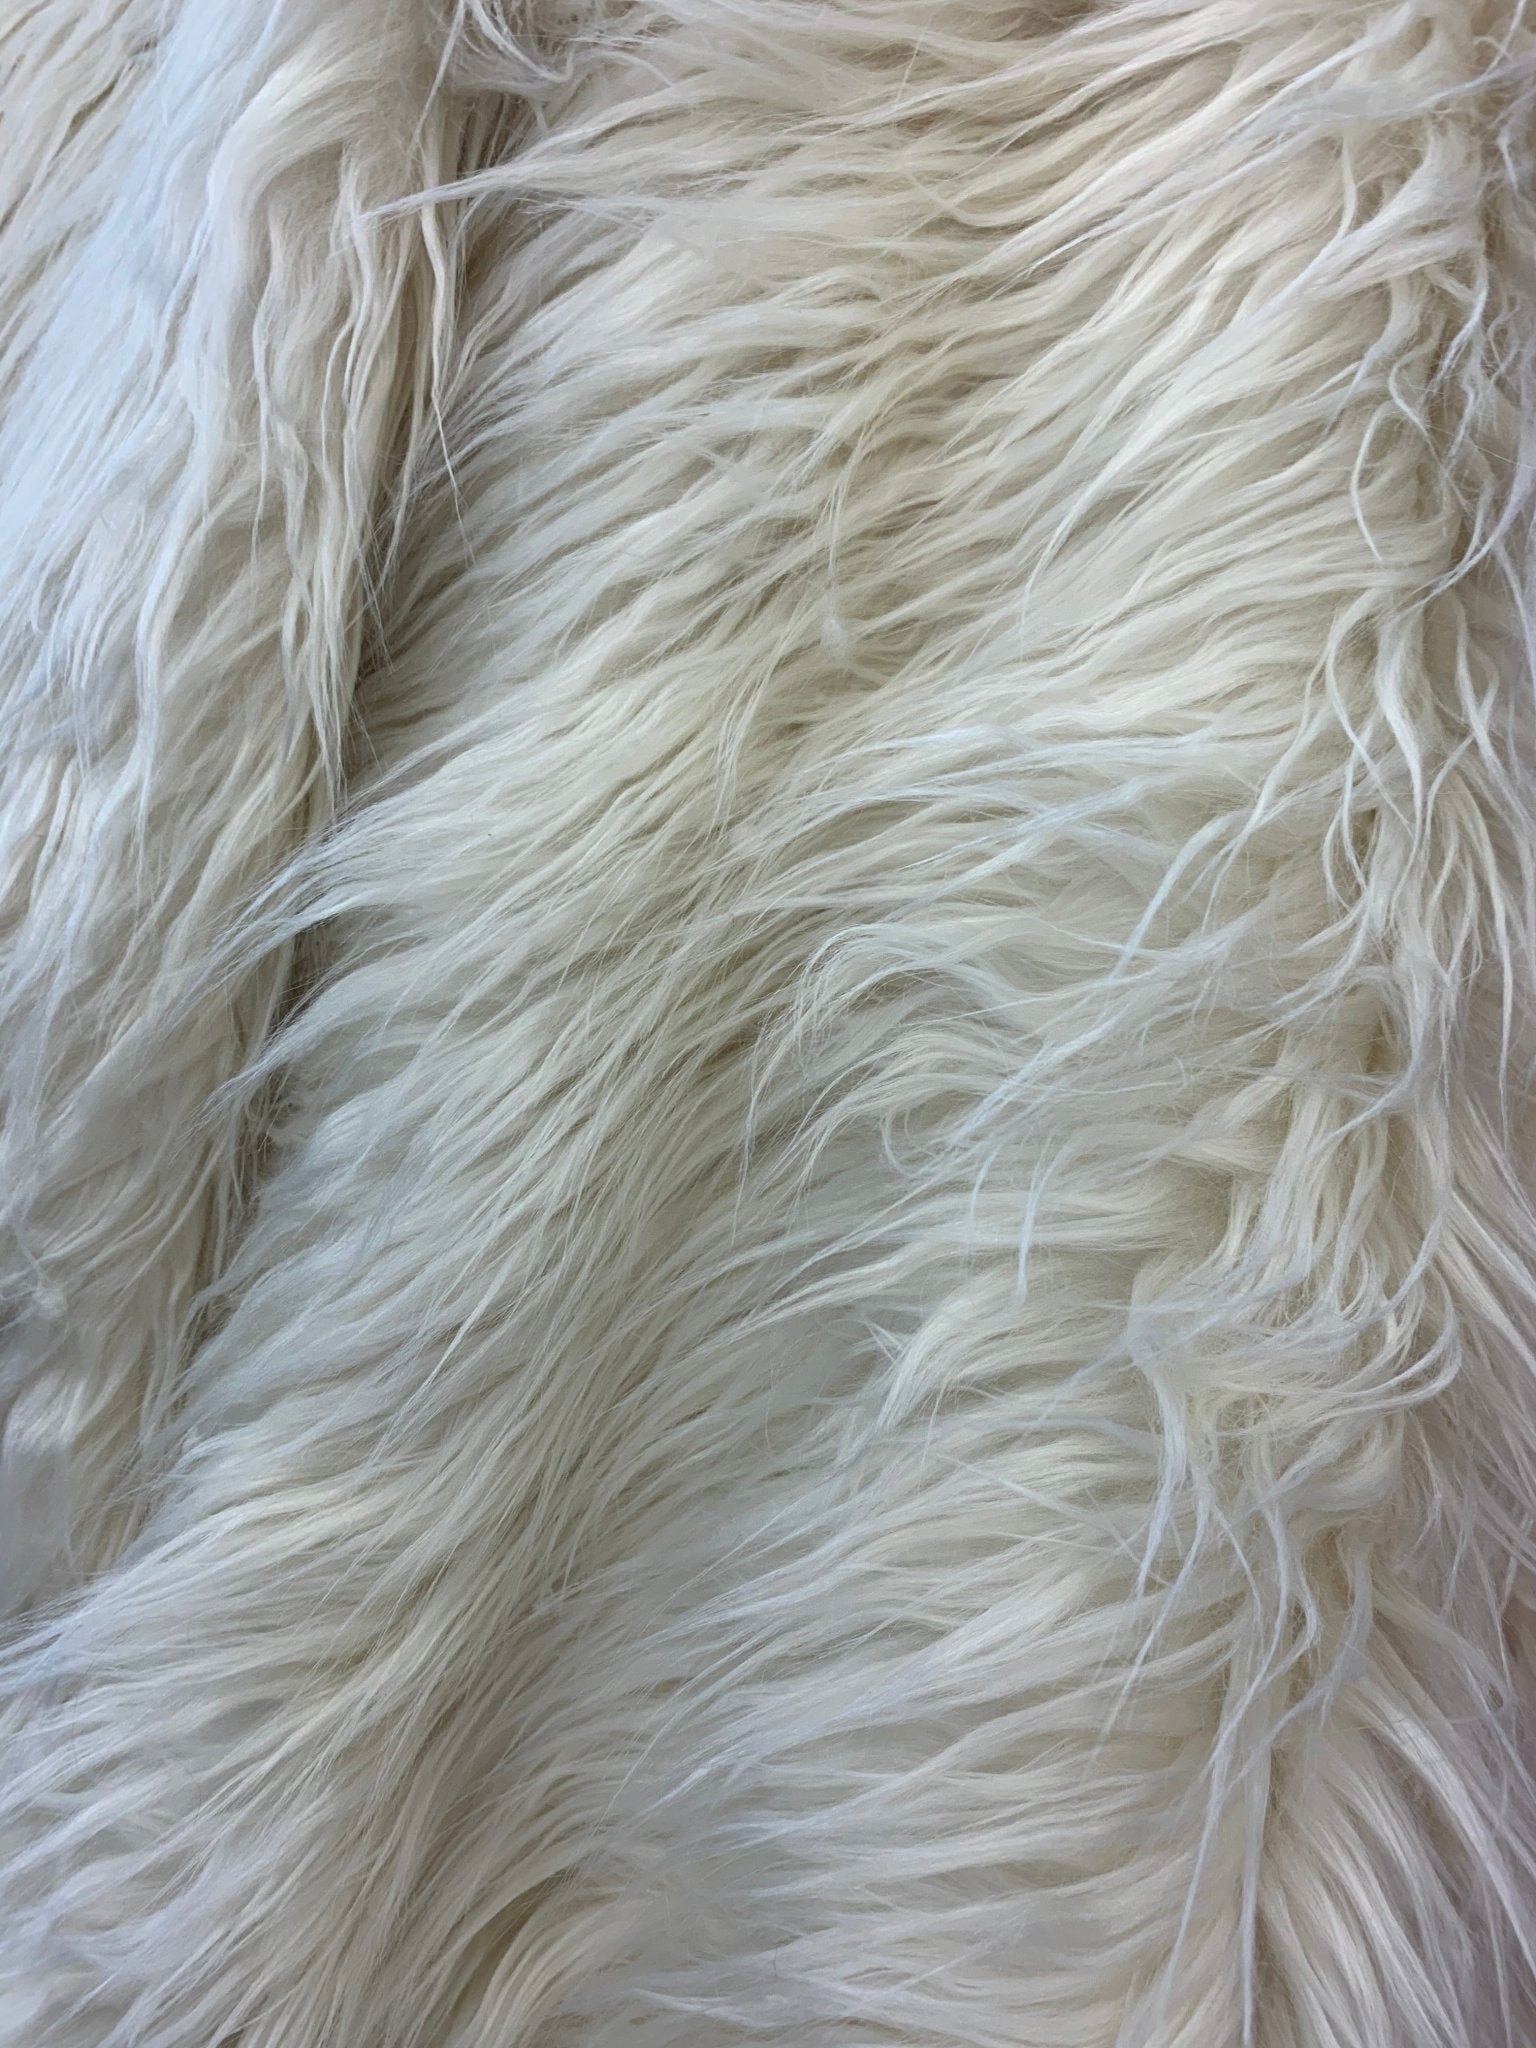 Mongolian Long Pile Fake Faux Fur Fabric Sold By The YardICEFABRICICE FABRICSIvoryBy The Yard (60 inches Wide)Mongolian Long Pile Fake Faux Fur Fabric Sold By The Yard ICEFABRIC